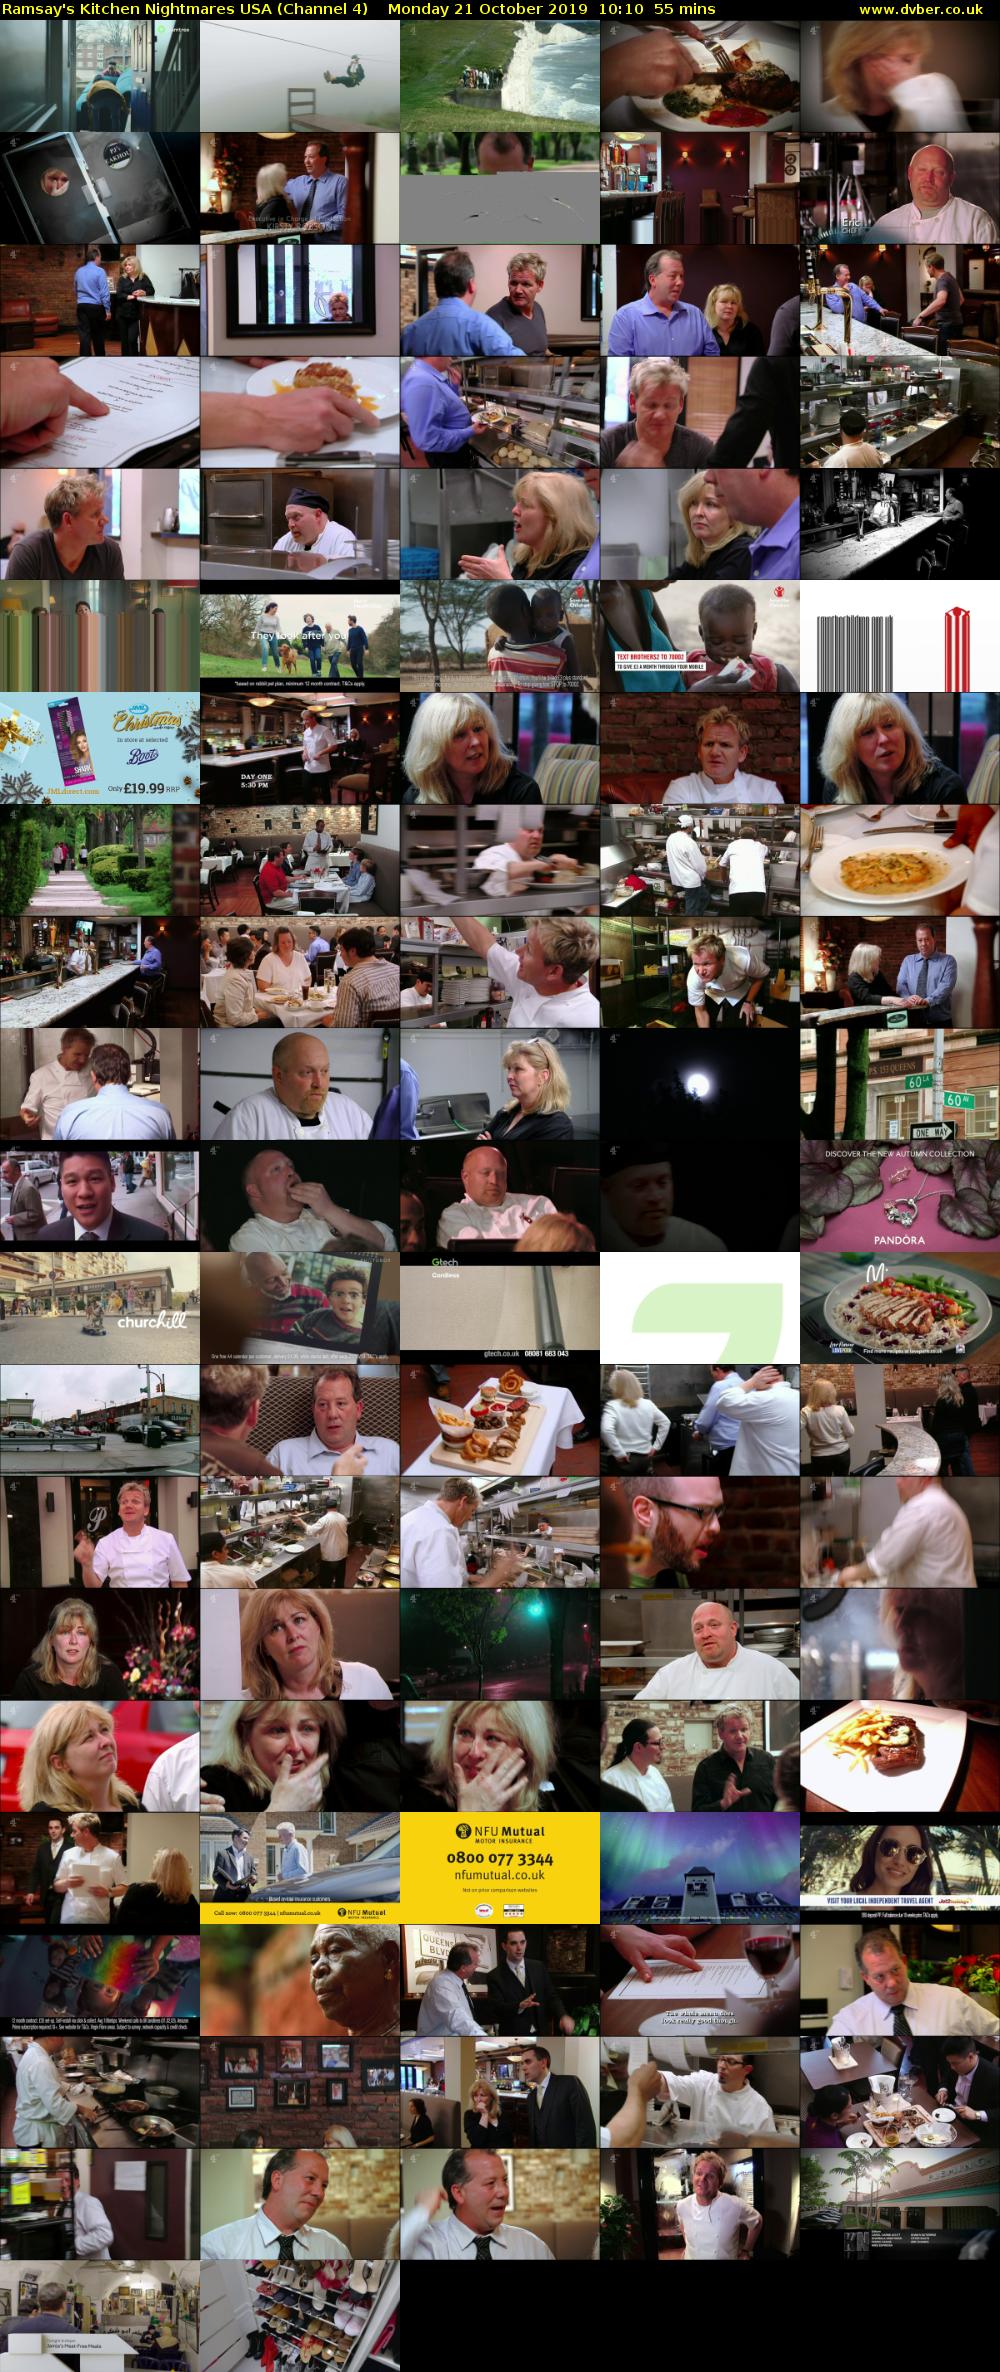 Ramsay's Kitchen Nightmares USA (Channel 4) Monday 21 October 2019 10:10 - 11:05